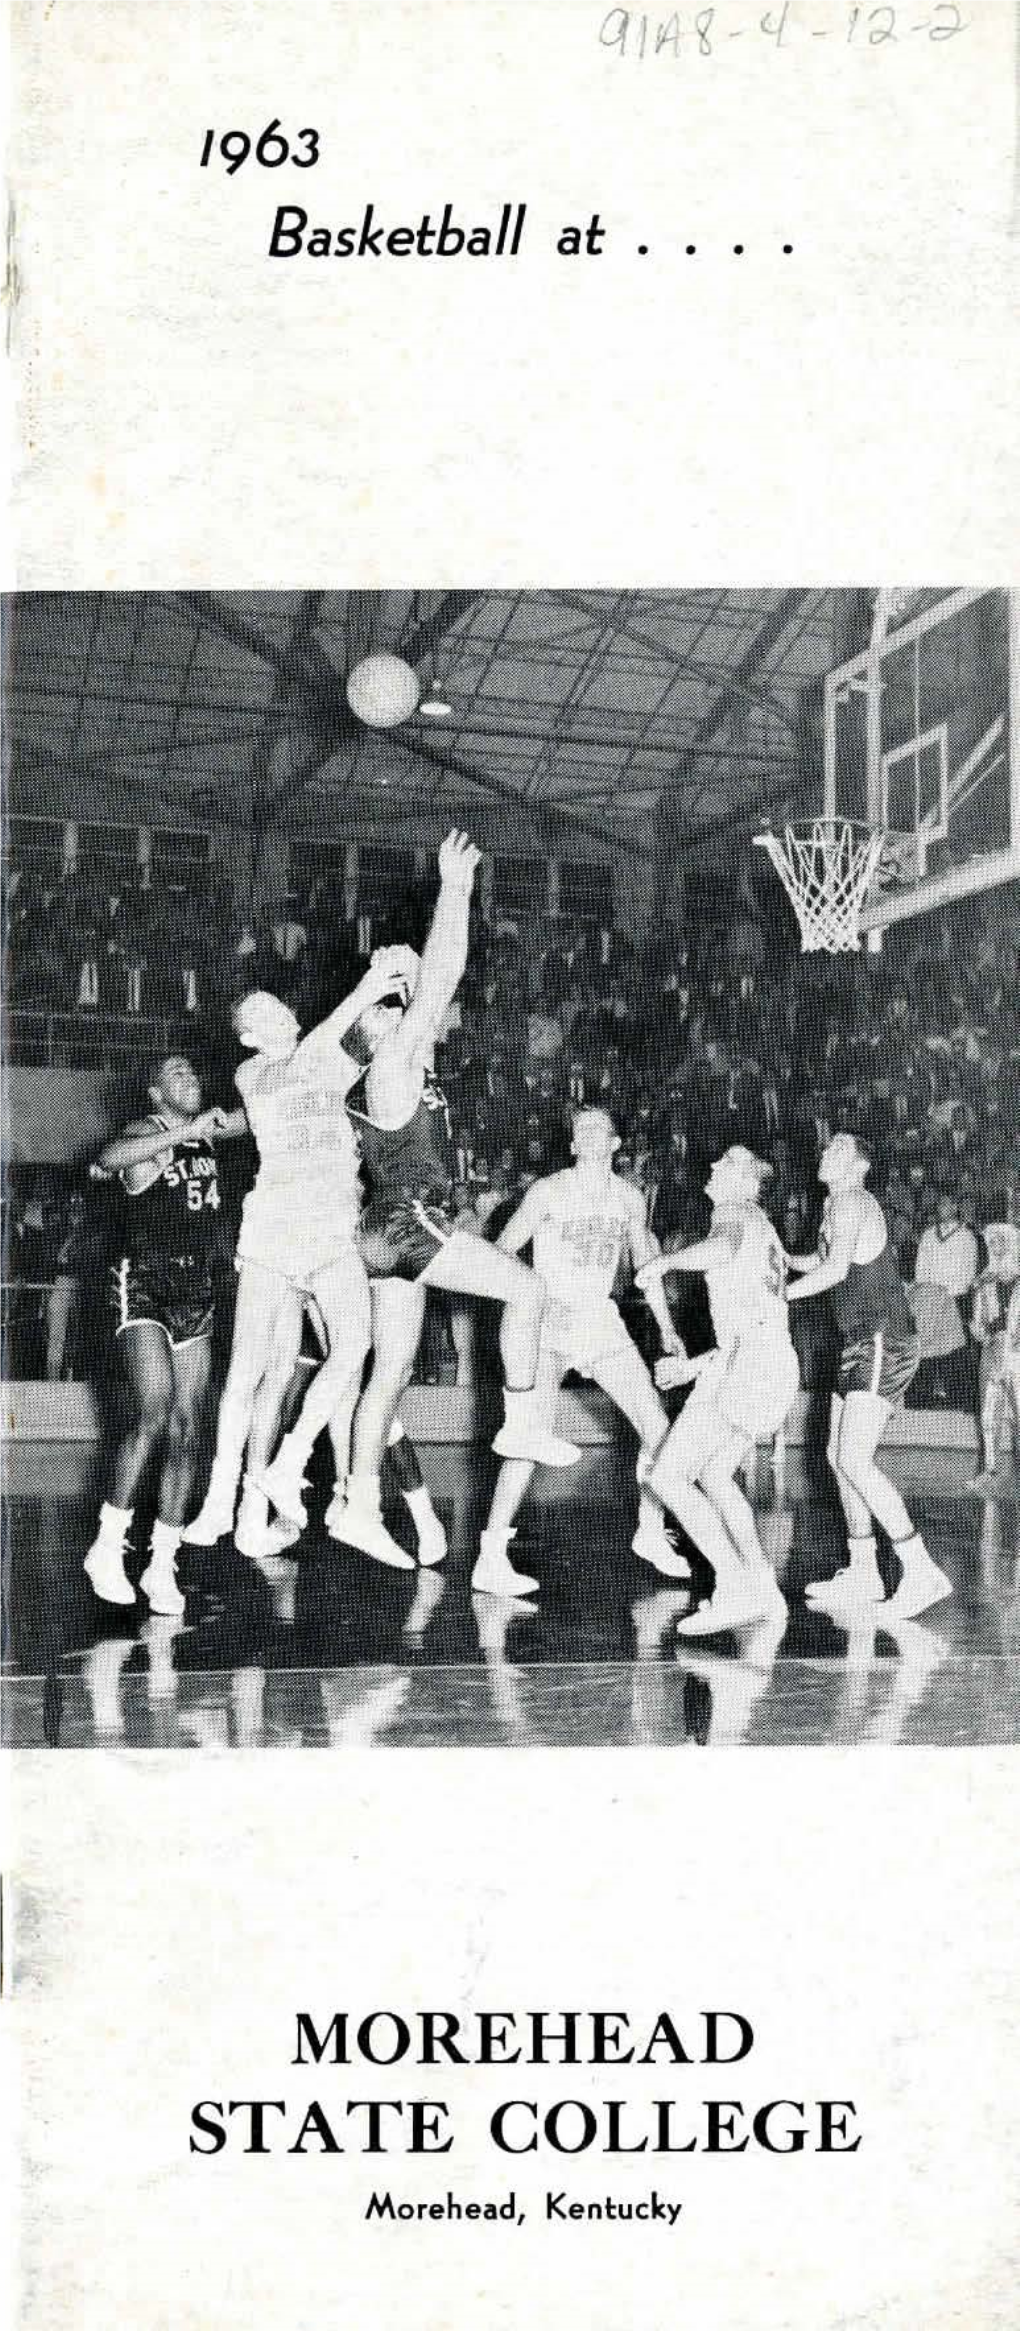 1963 Basketball at ...Morehead State College